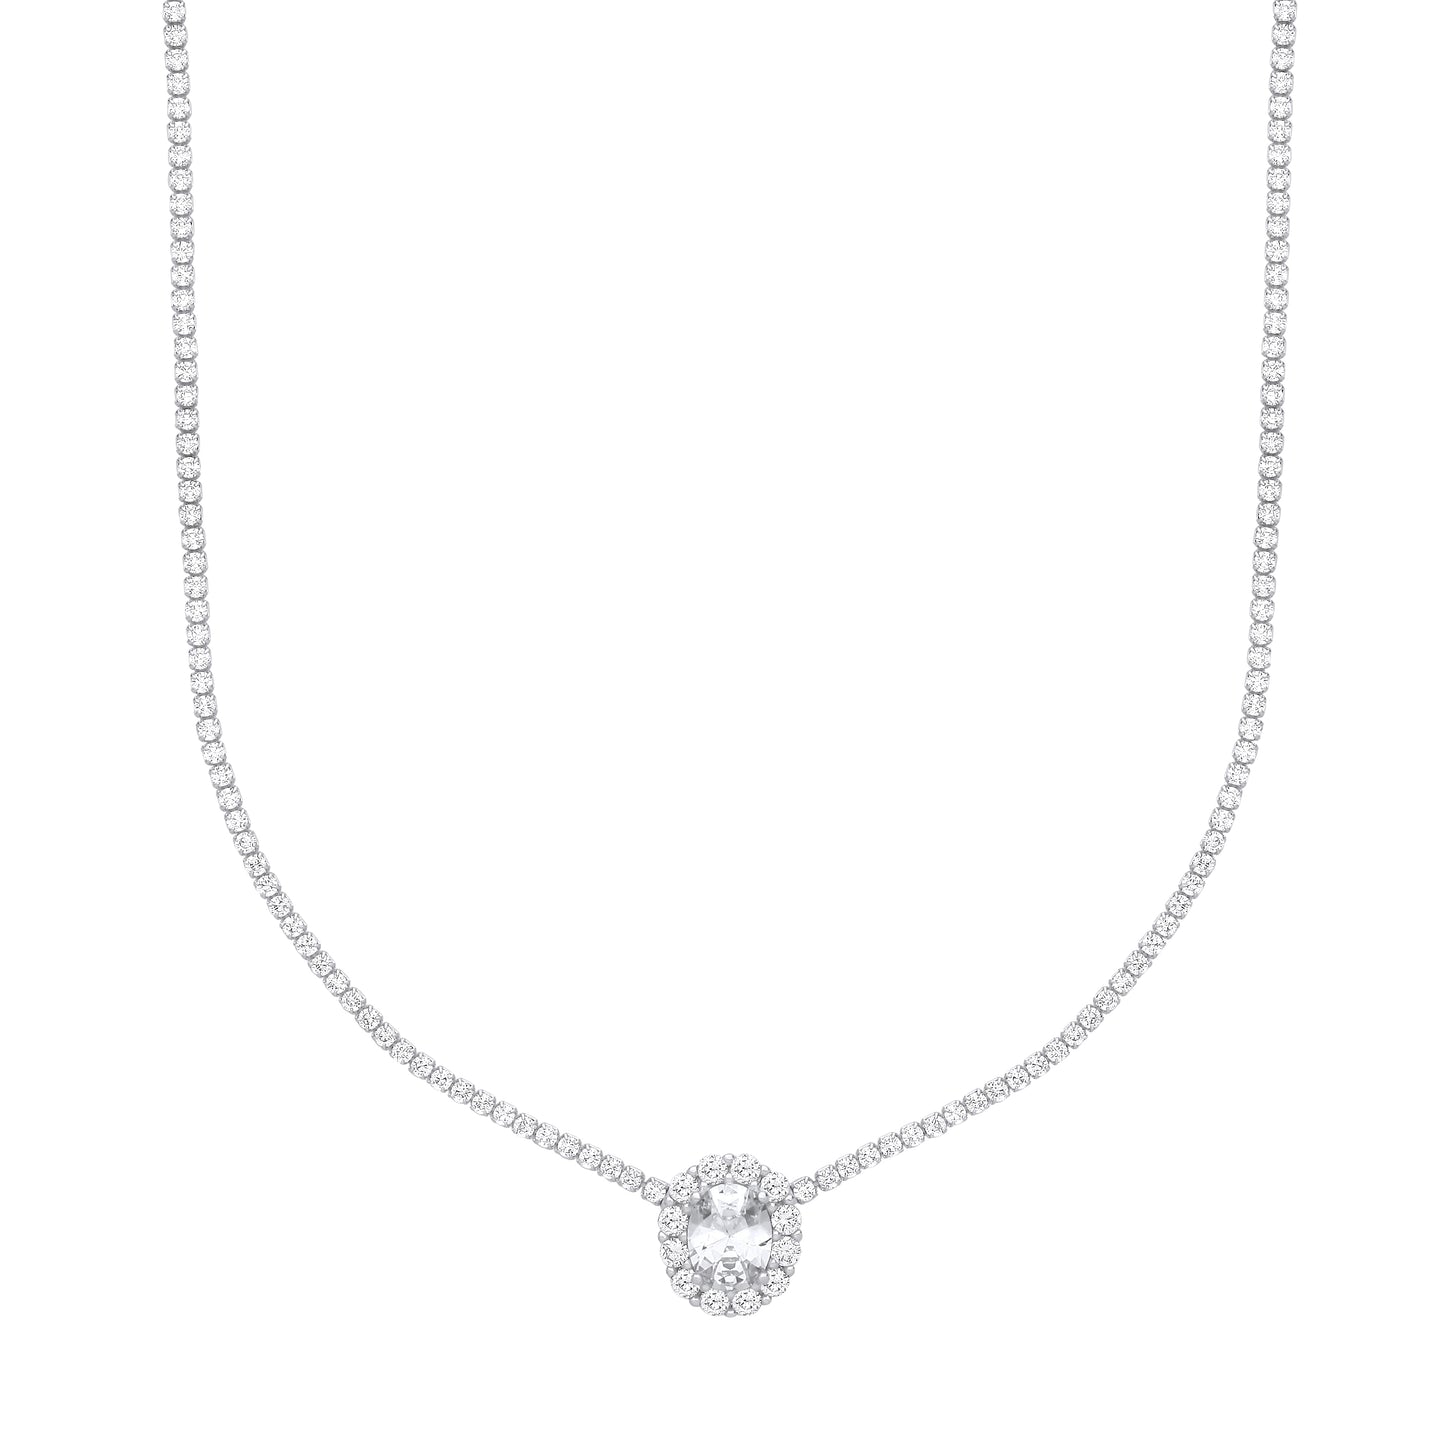 Silver  Oval Solitaire Halo Cluster Tennis Necklace - GVK401